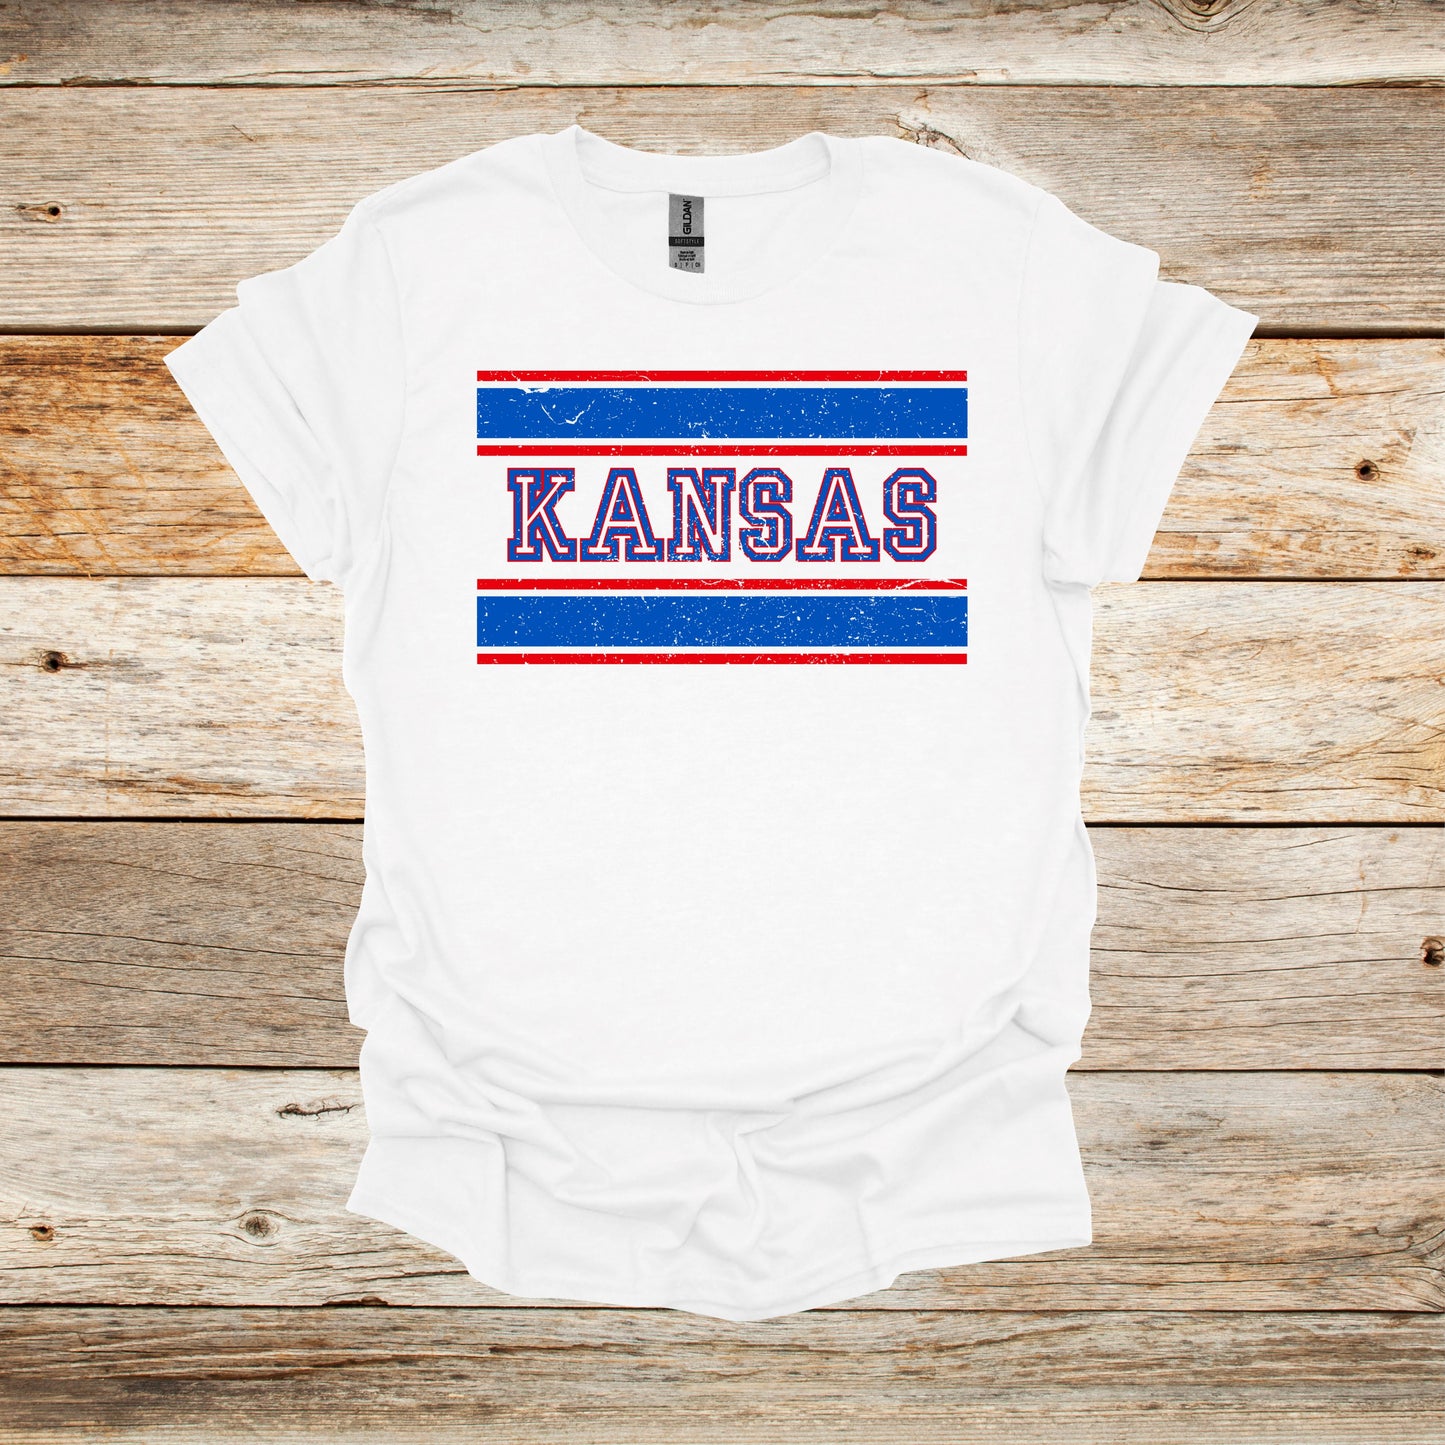 College T Shirt - Kansas Jayhawks - Adult and Children's Tee Shirts T-Shirts Graphic Avenue White Adult Small 